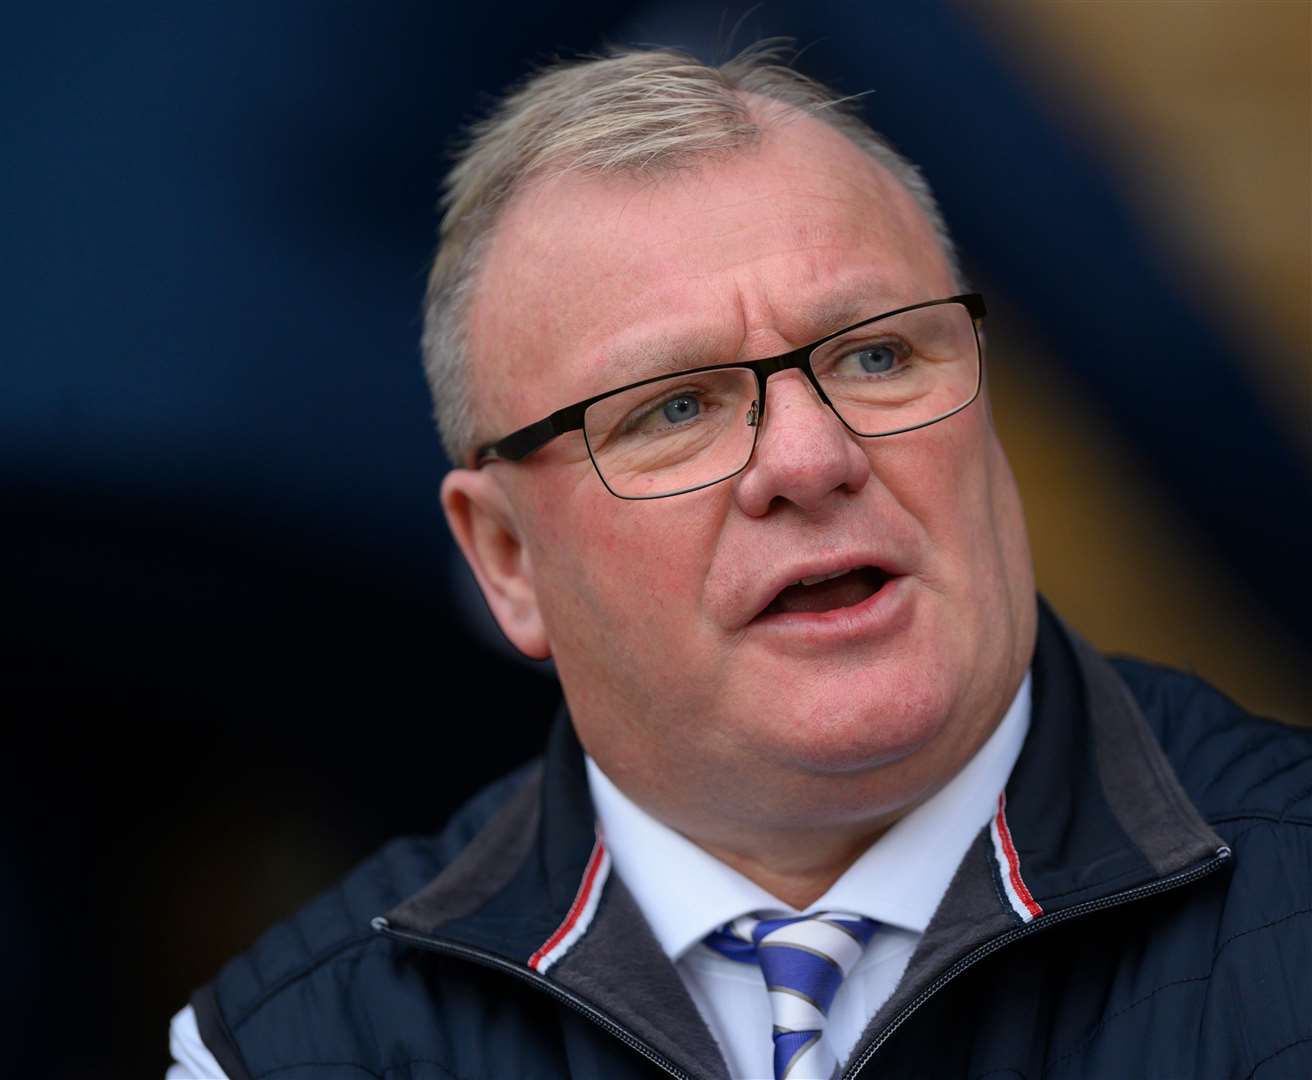 Steve Evans' side are in good form ahead of the trip to Hull City and fear nobody